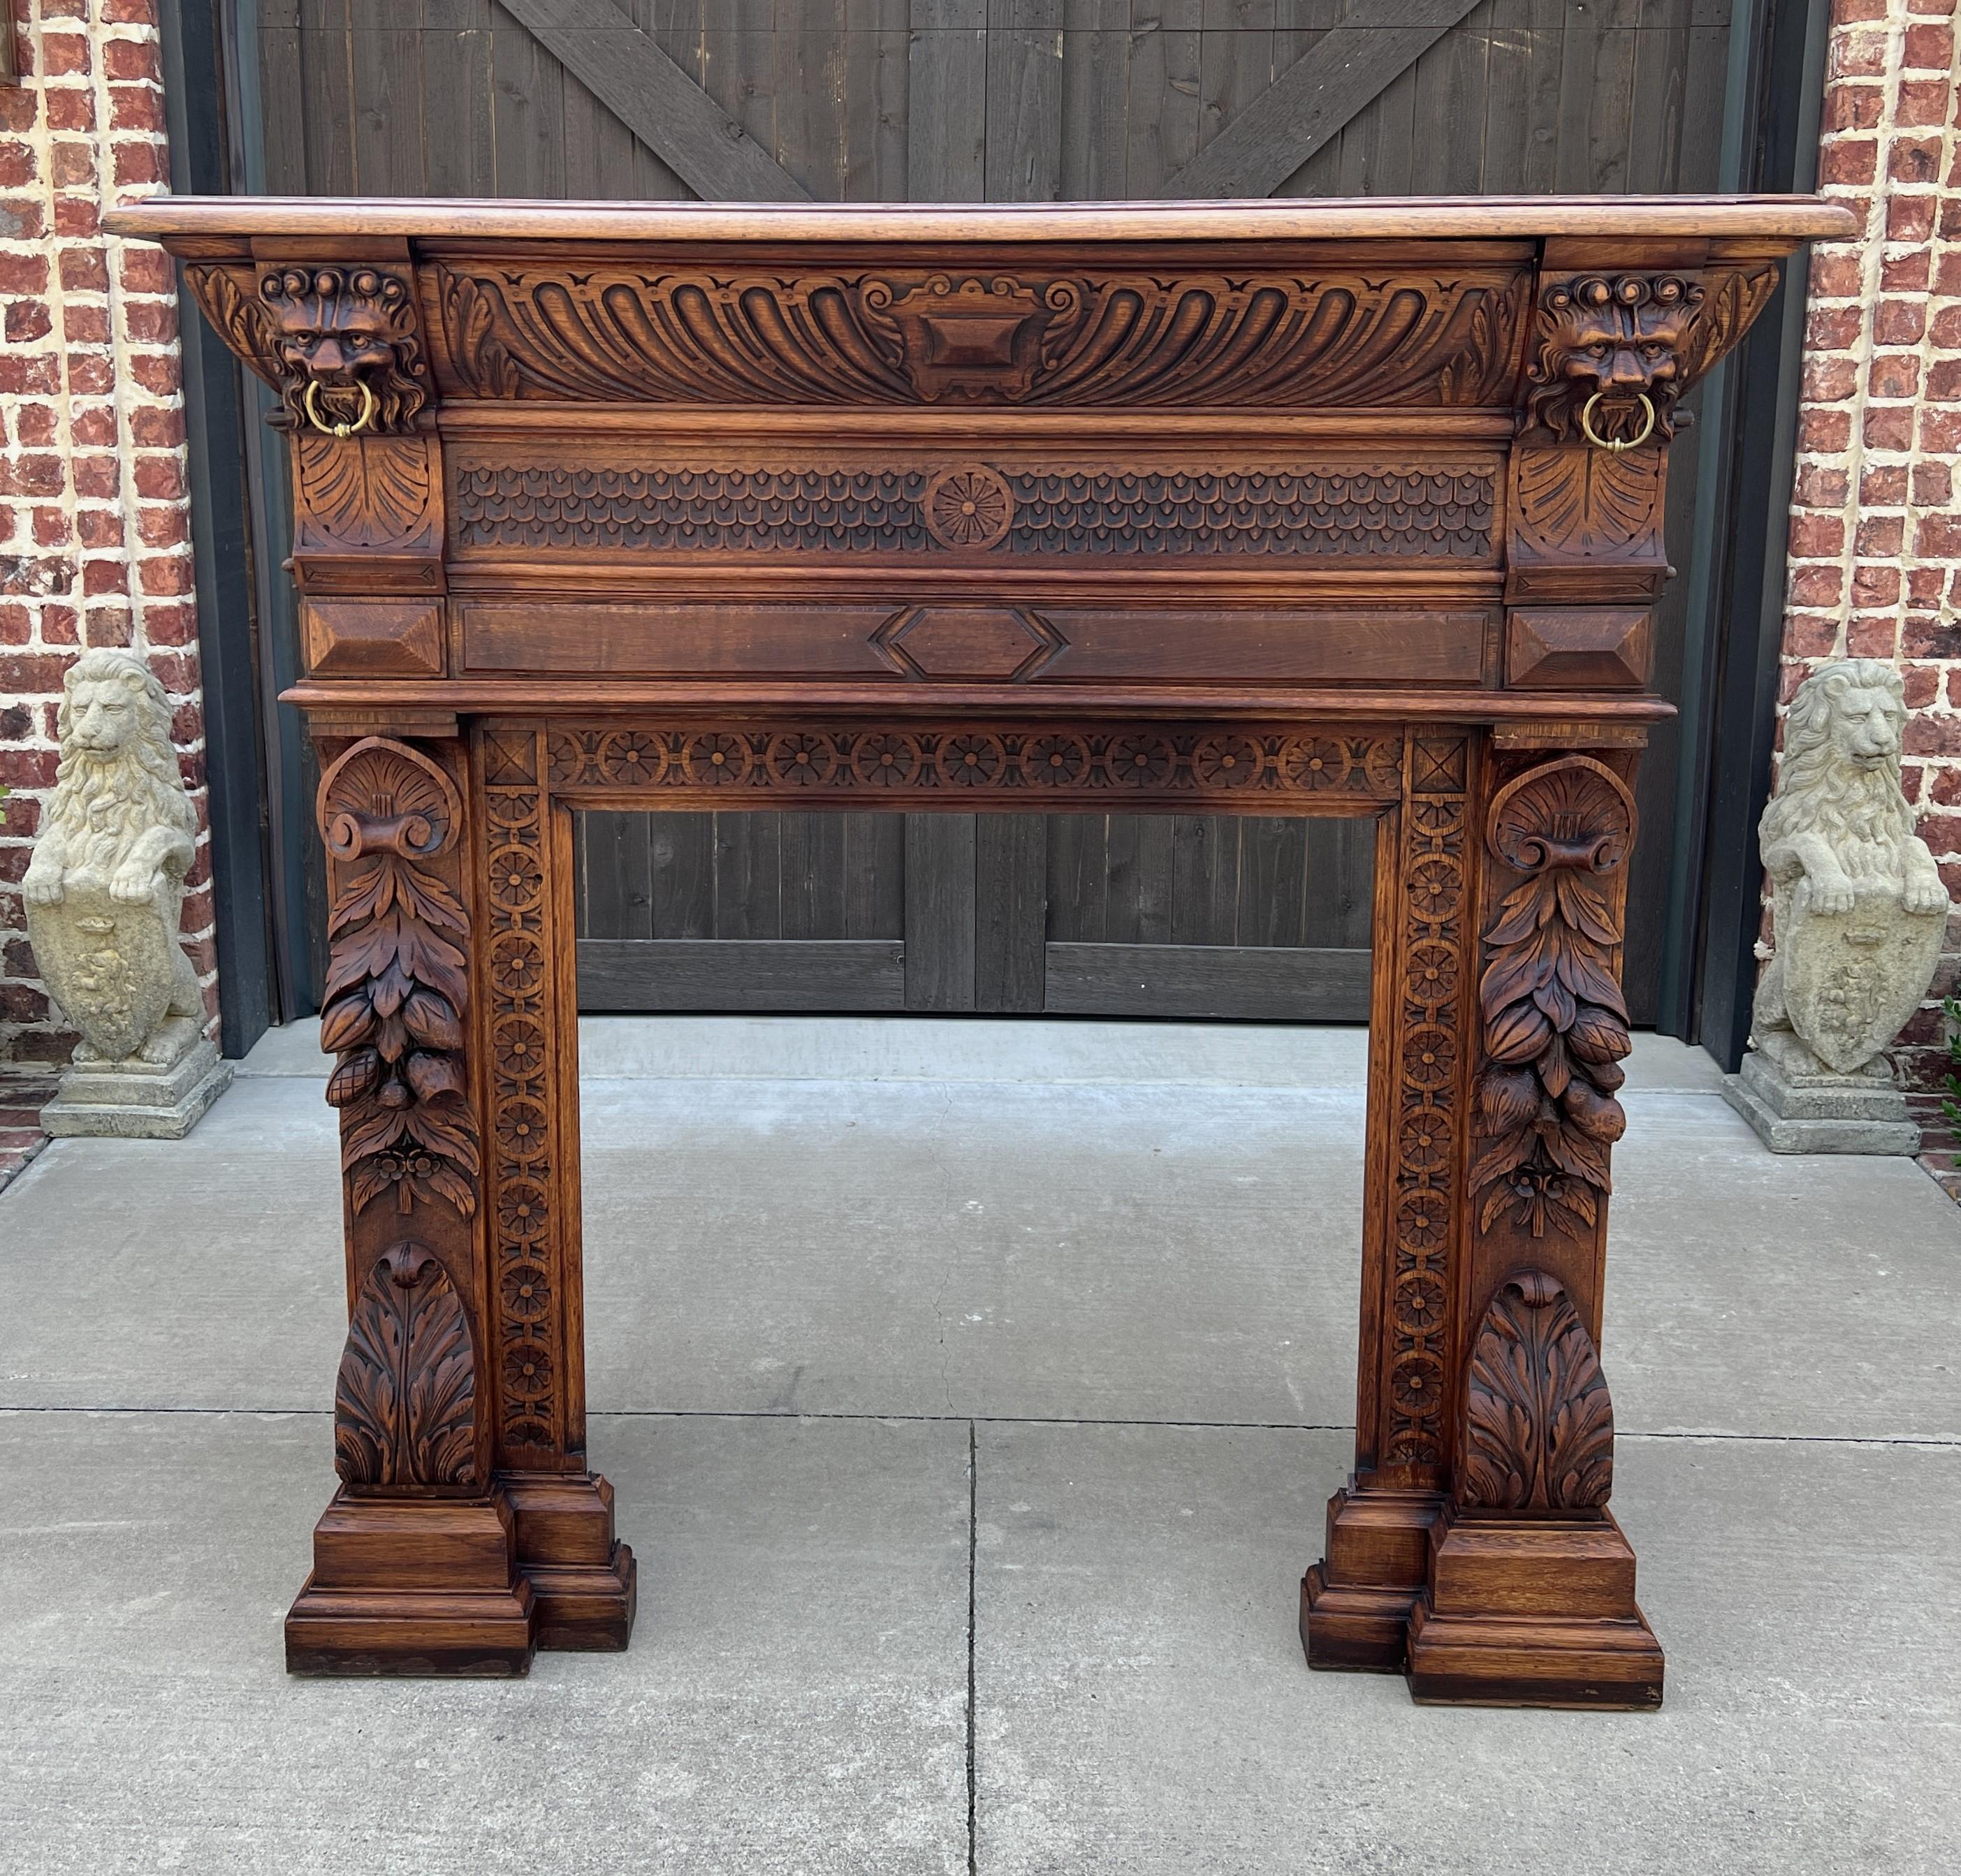 SUPERB Antique LARGE French Fireplace Mantel Surround ~~Renaissance Revival~~HIGHLY CARVED OAK~~c. 1890s

This HANDSOME statement piece will add charm and character to your home or castle~~beautifully carved in oak~~perfect for living area,